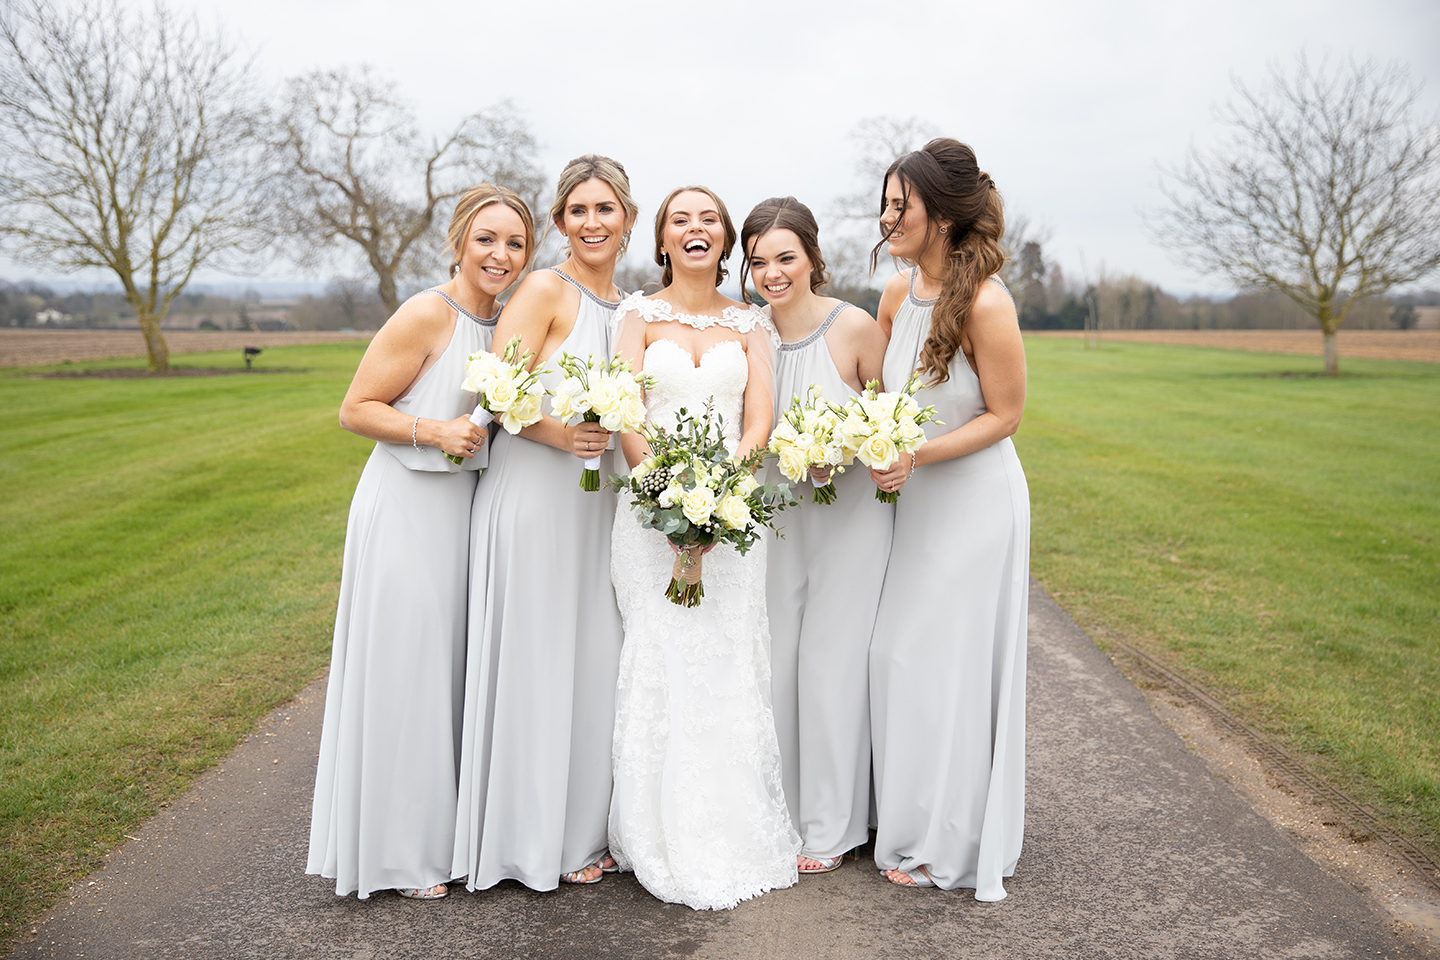 The bride enjoys some time at Bassmead Manor Barns with her bridesmaids who wear grey bridesmaids dresses